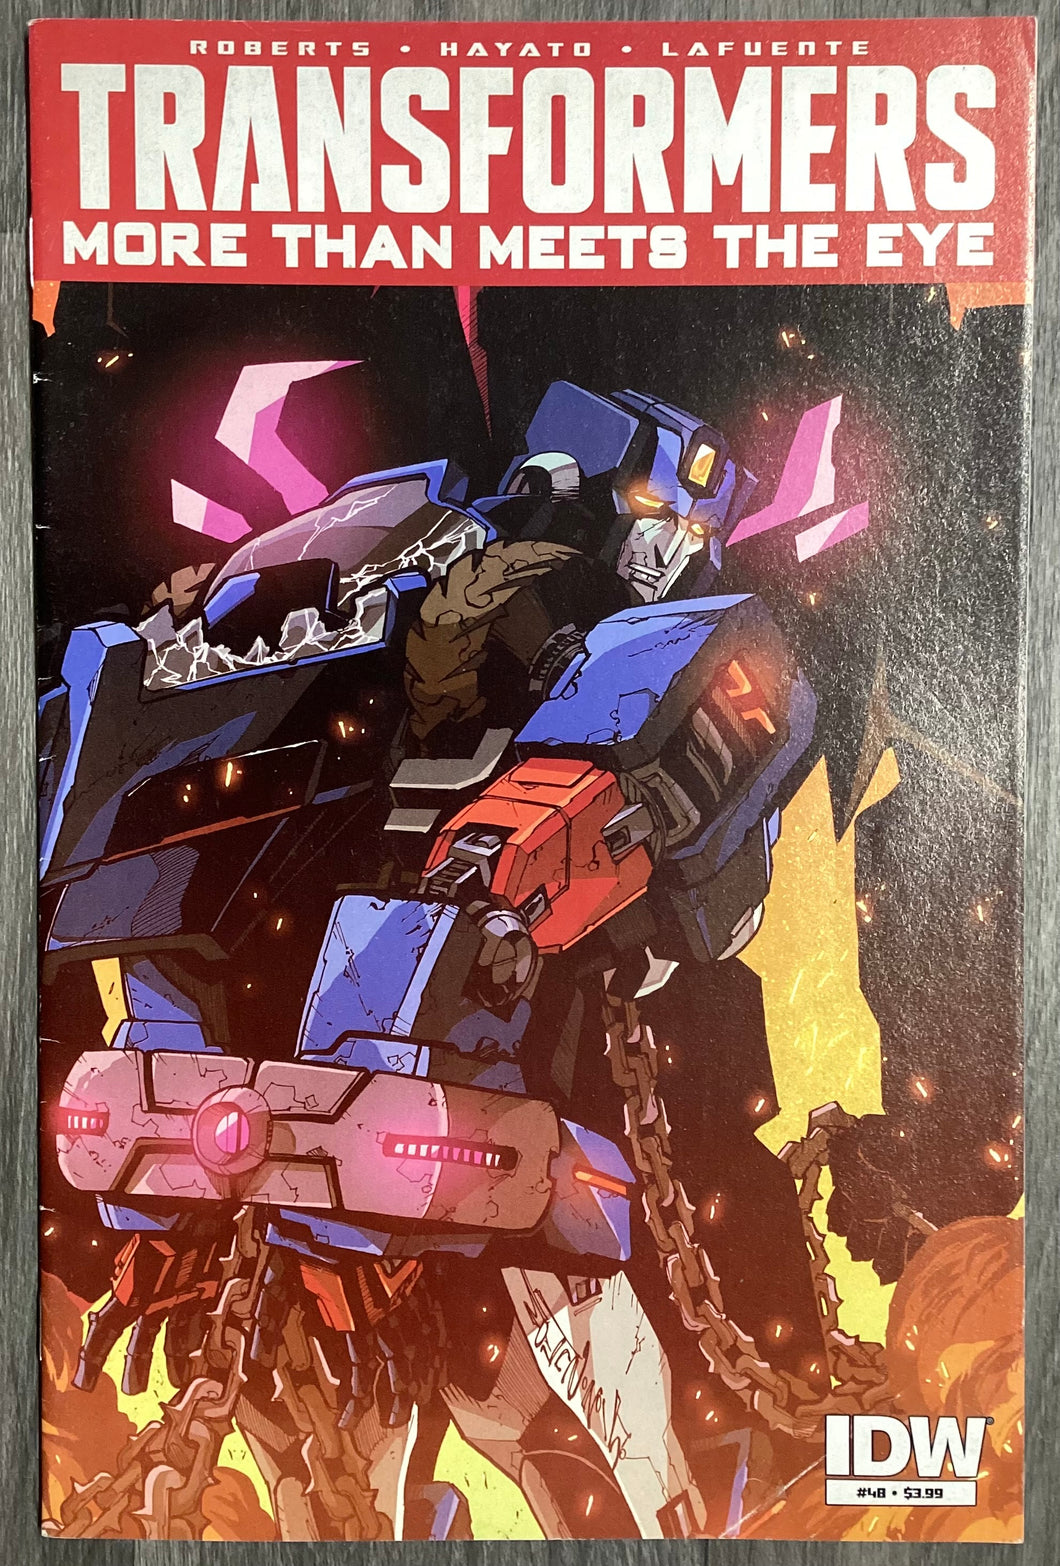 The Transformers: More Than Meets the Eye No. #48 2015 IDW Comics